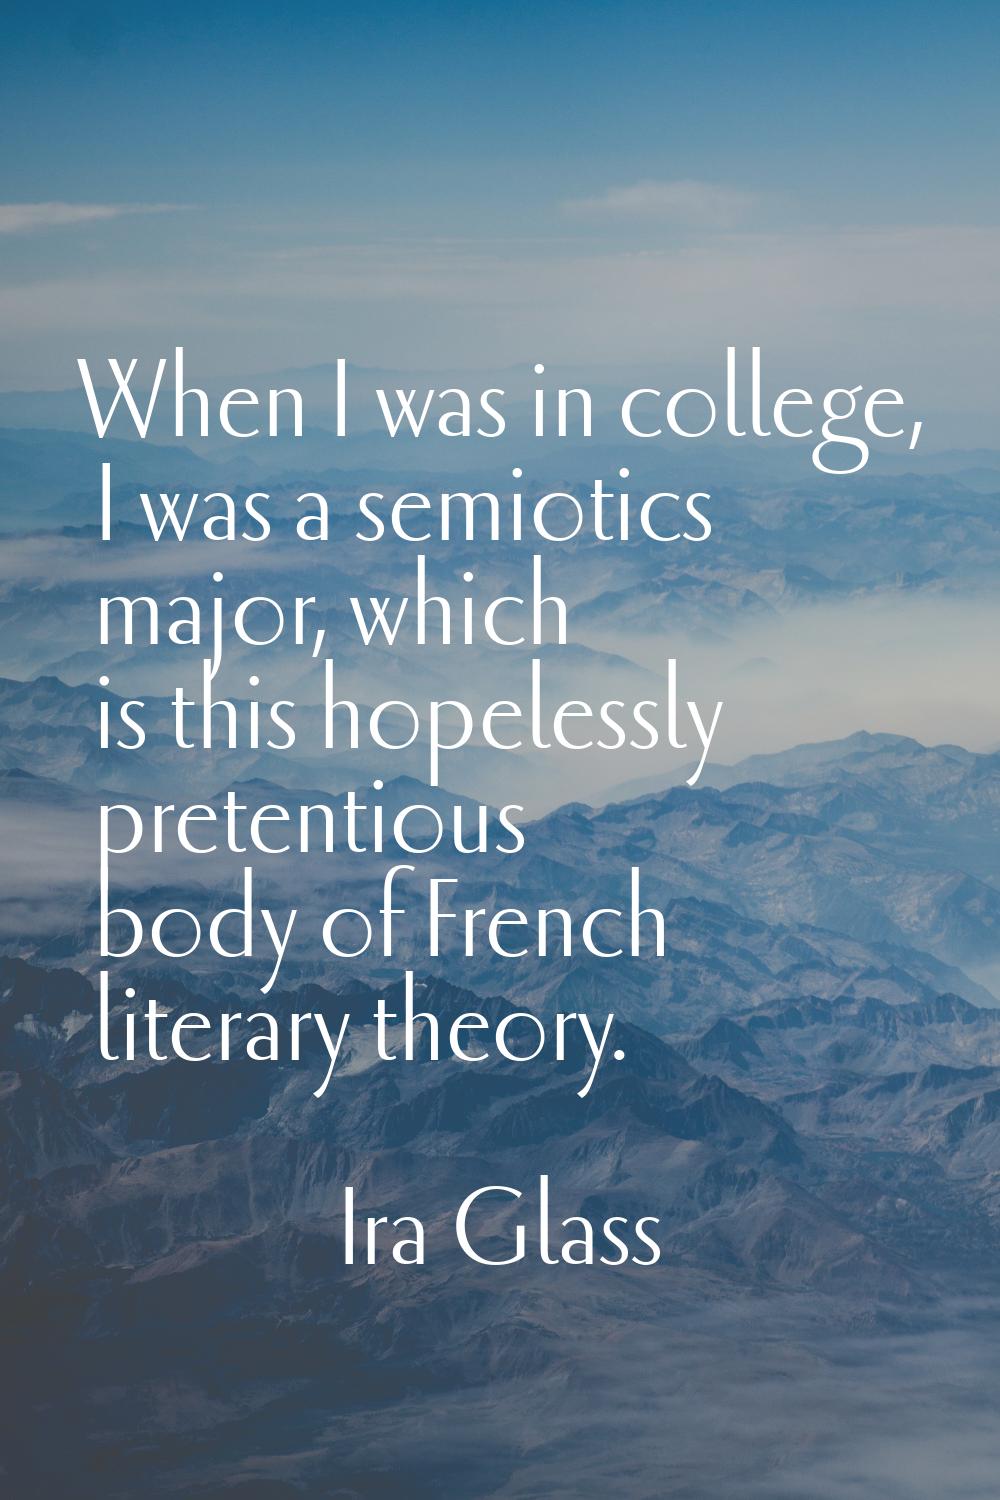 When I was in college, I was a semiotics major, which is this hopelessly pretentious body of French